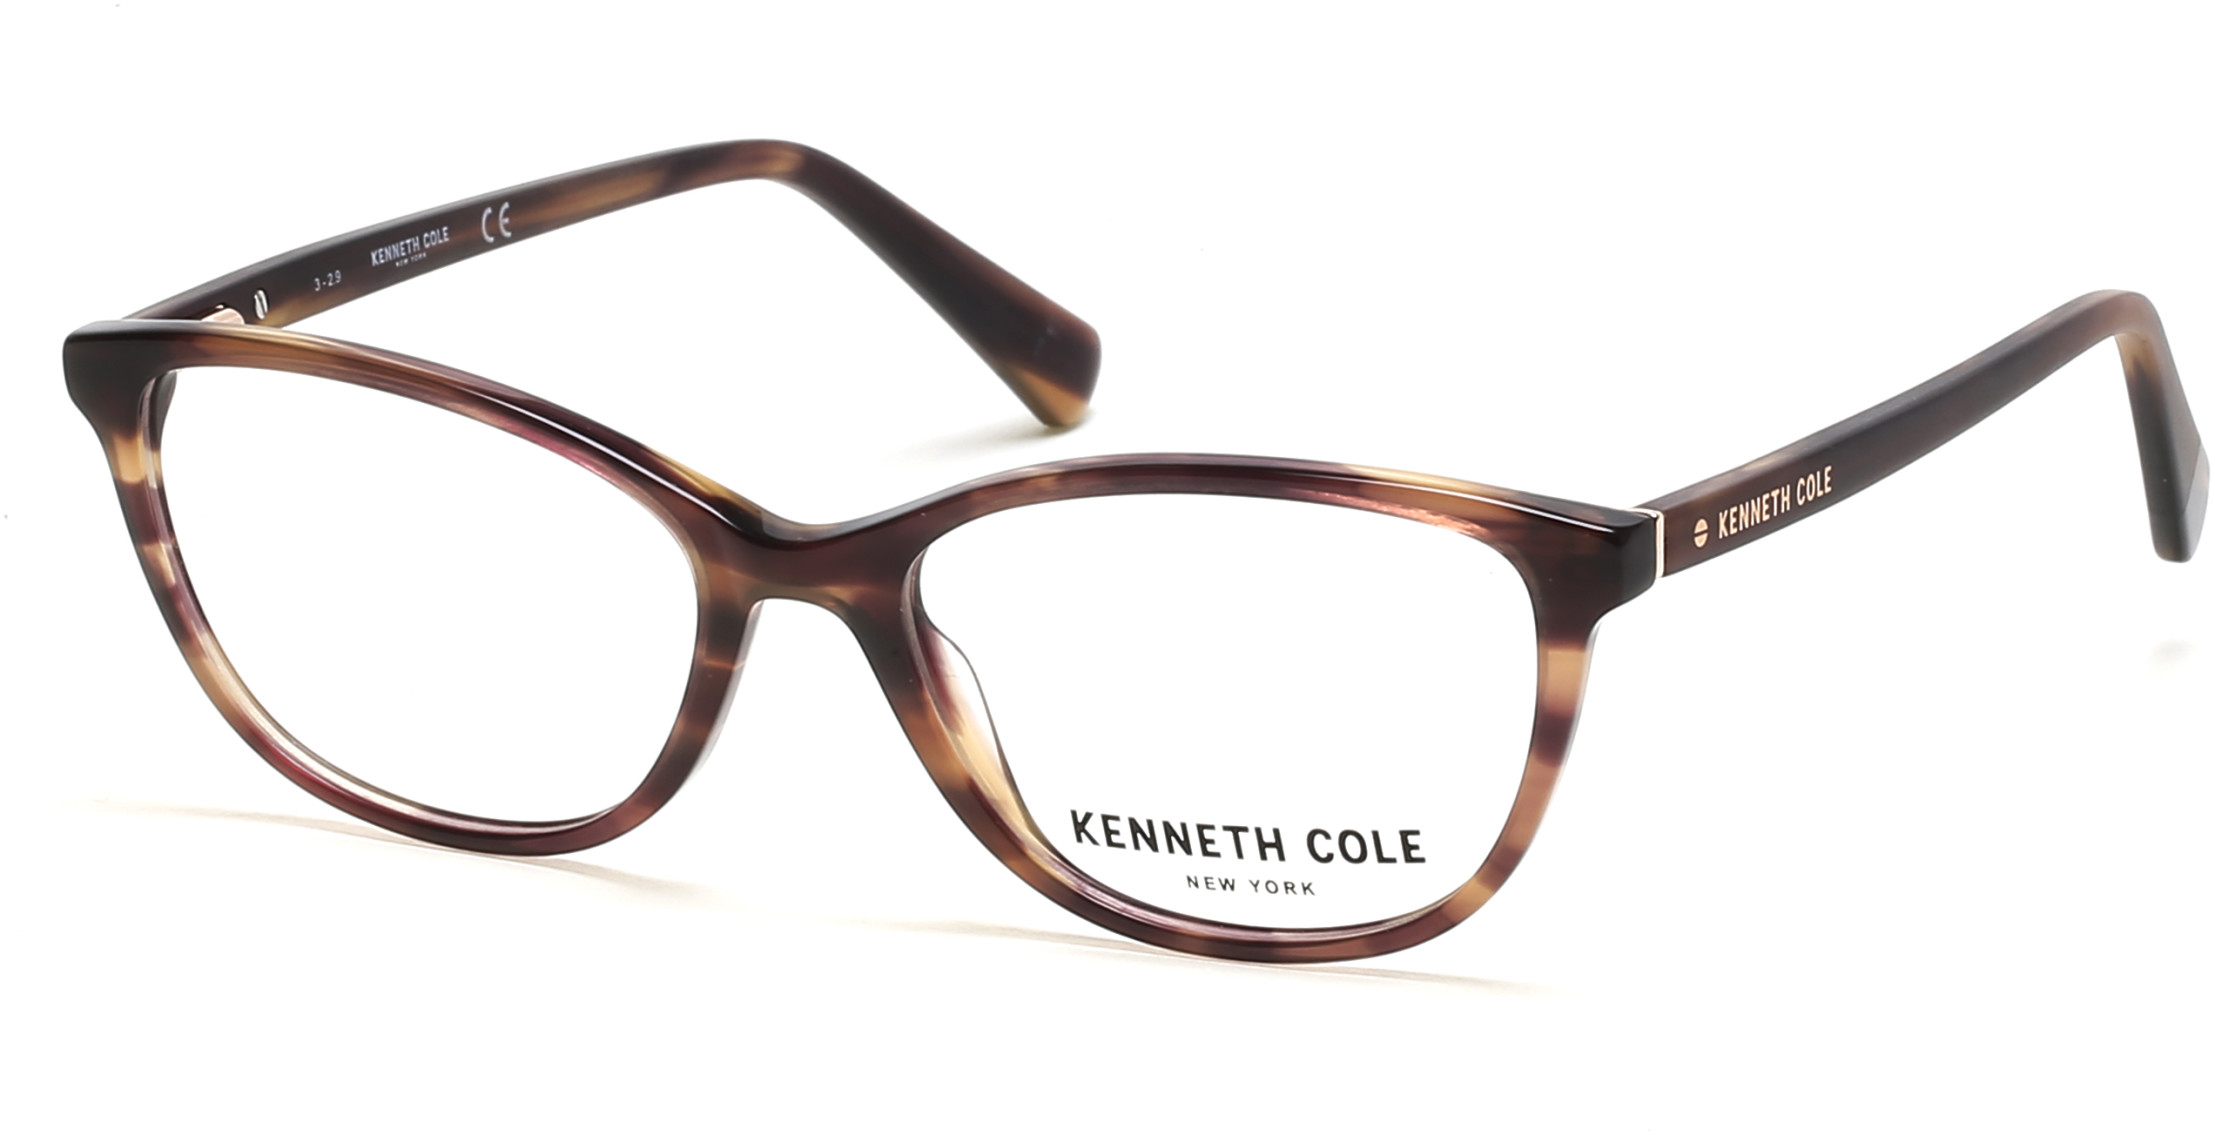 KENNETH COLE NY 0308